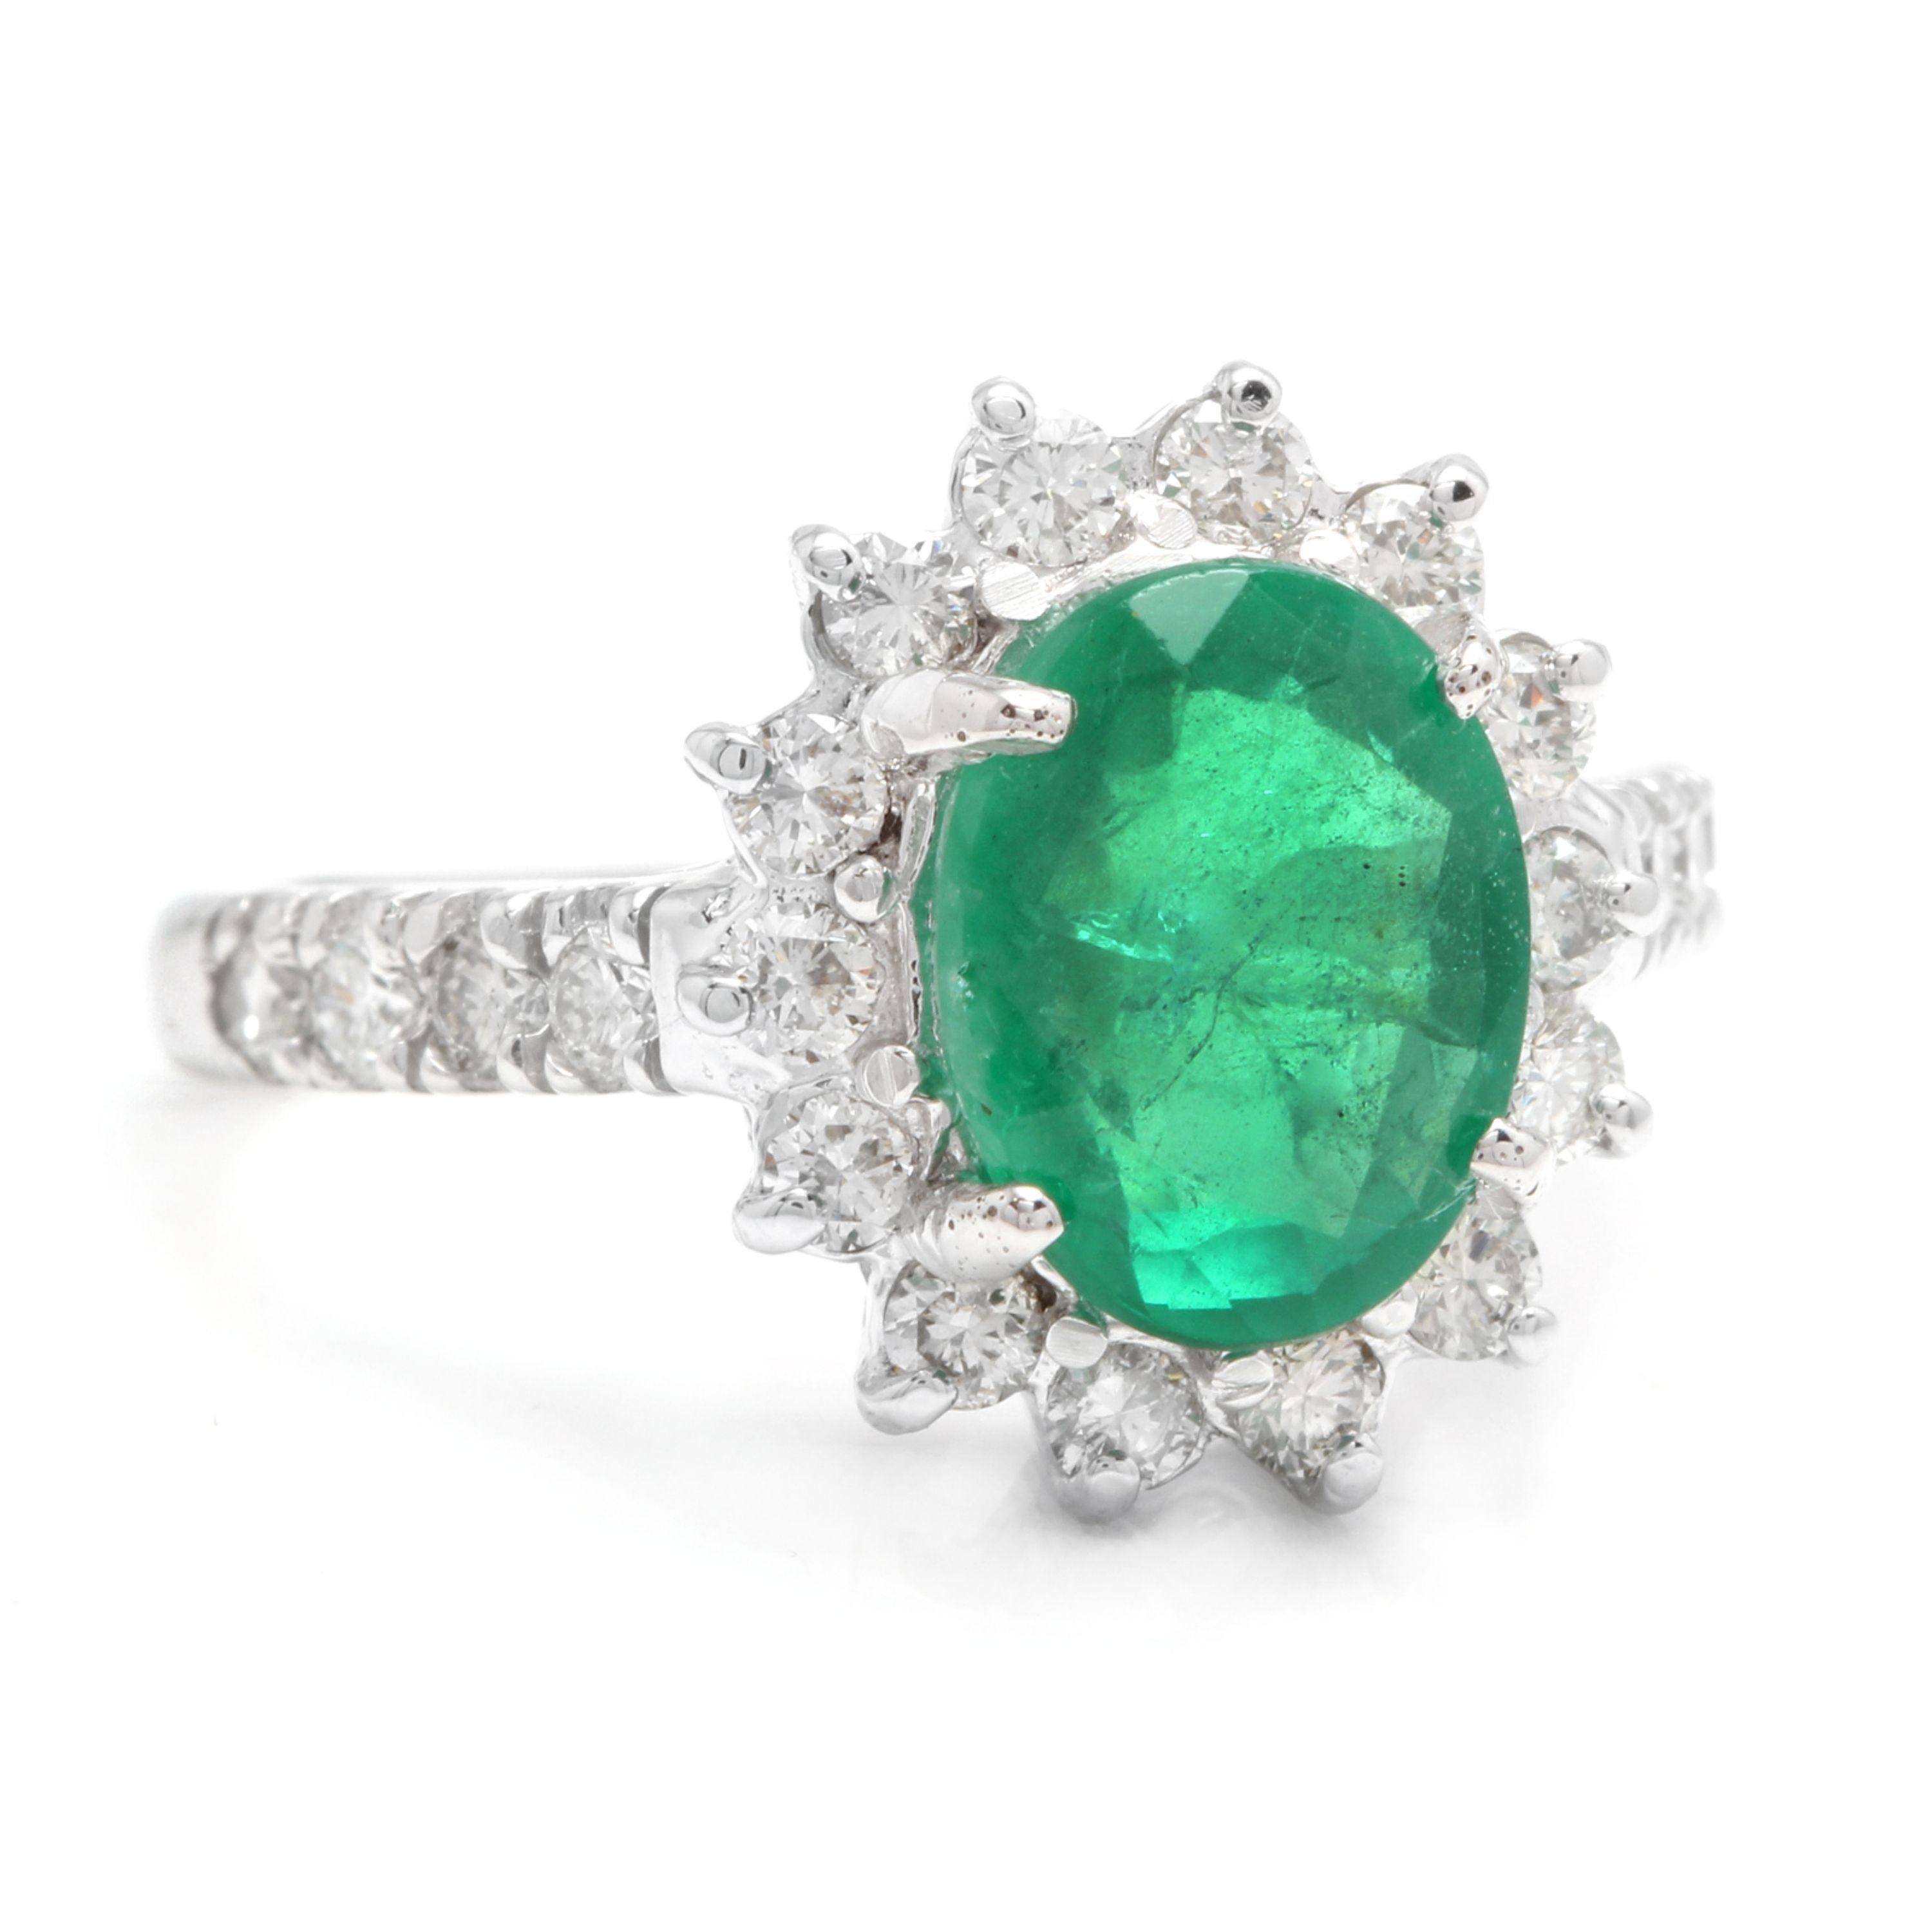 4.00 Carats Natural Emerald and Diamond 14K Solid White Gold Ring

Total Natural Green Emerald Weight is: Approx. 3.00 Carats (transparent)

Emerald Treatment: Oiling

Emerald Measures: 10 x 8mm

Natural Round Diamonds Weight: Approx. 1.00 Carats